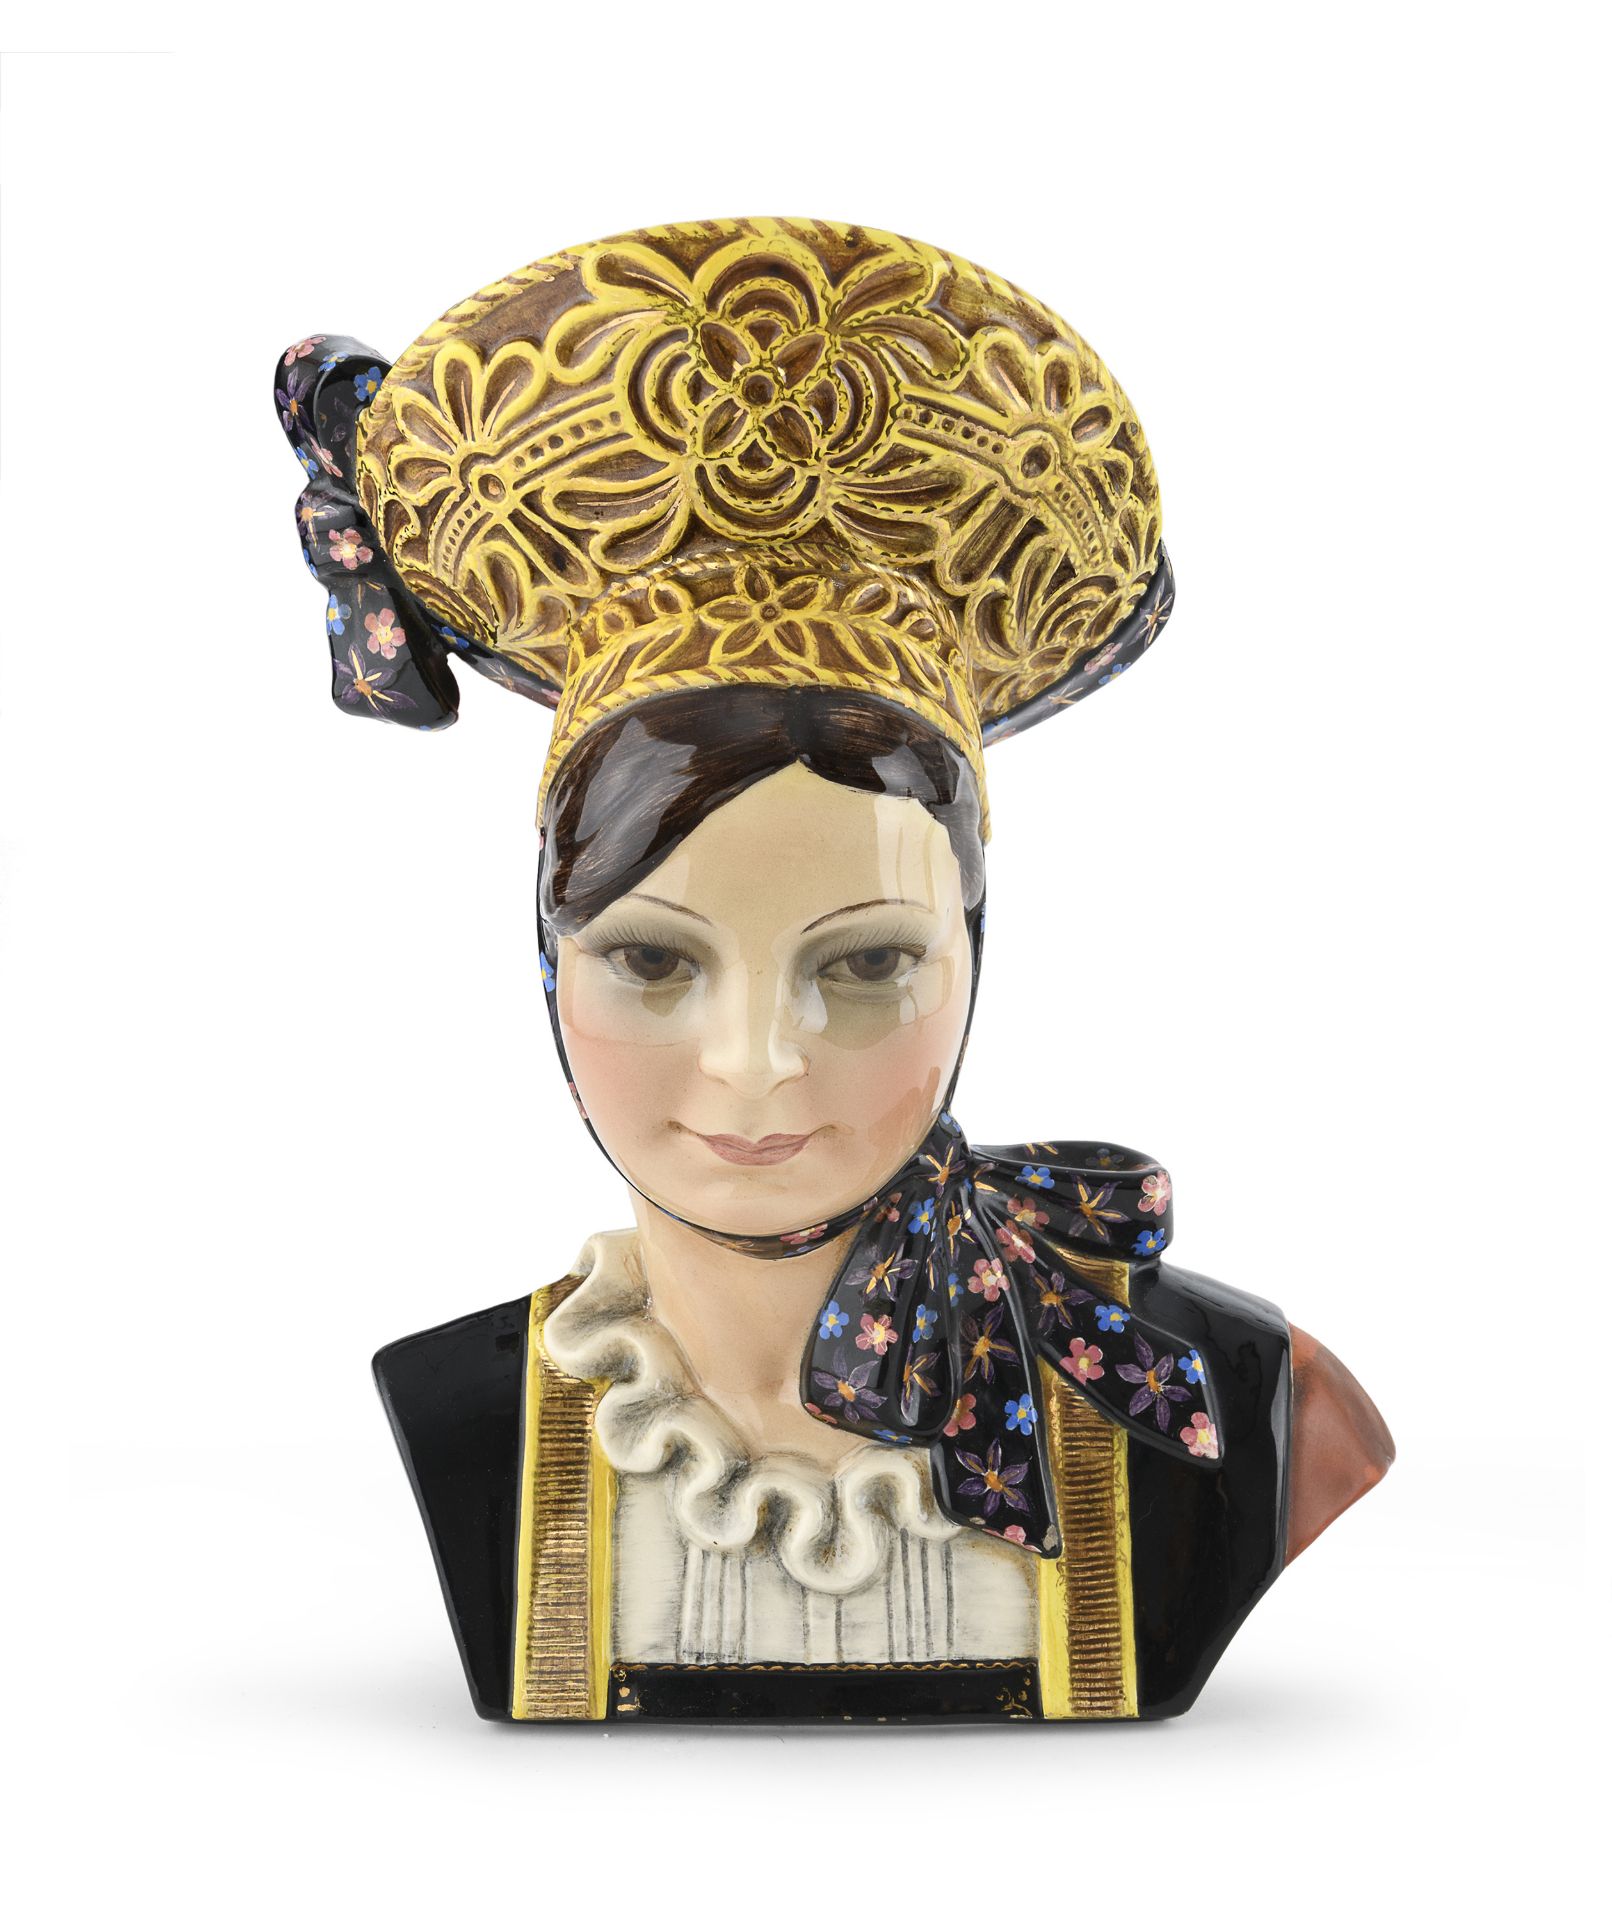 CERAMIC BUST OF A WOMAN IGNI TURIN 1950s